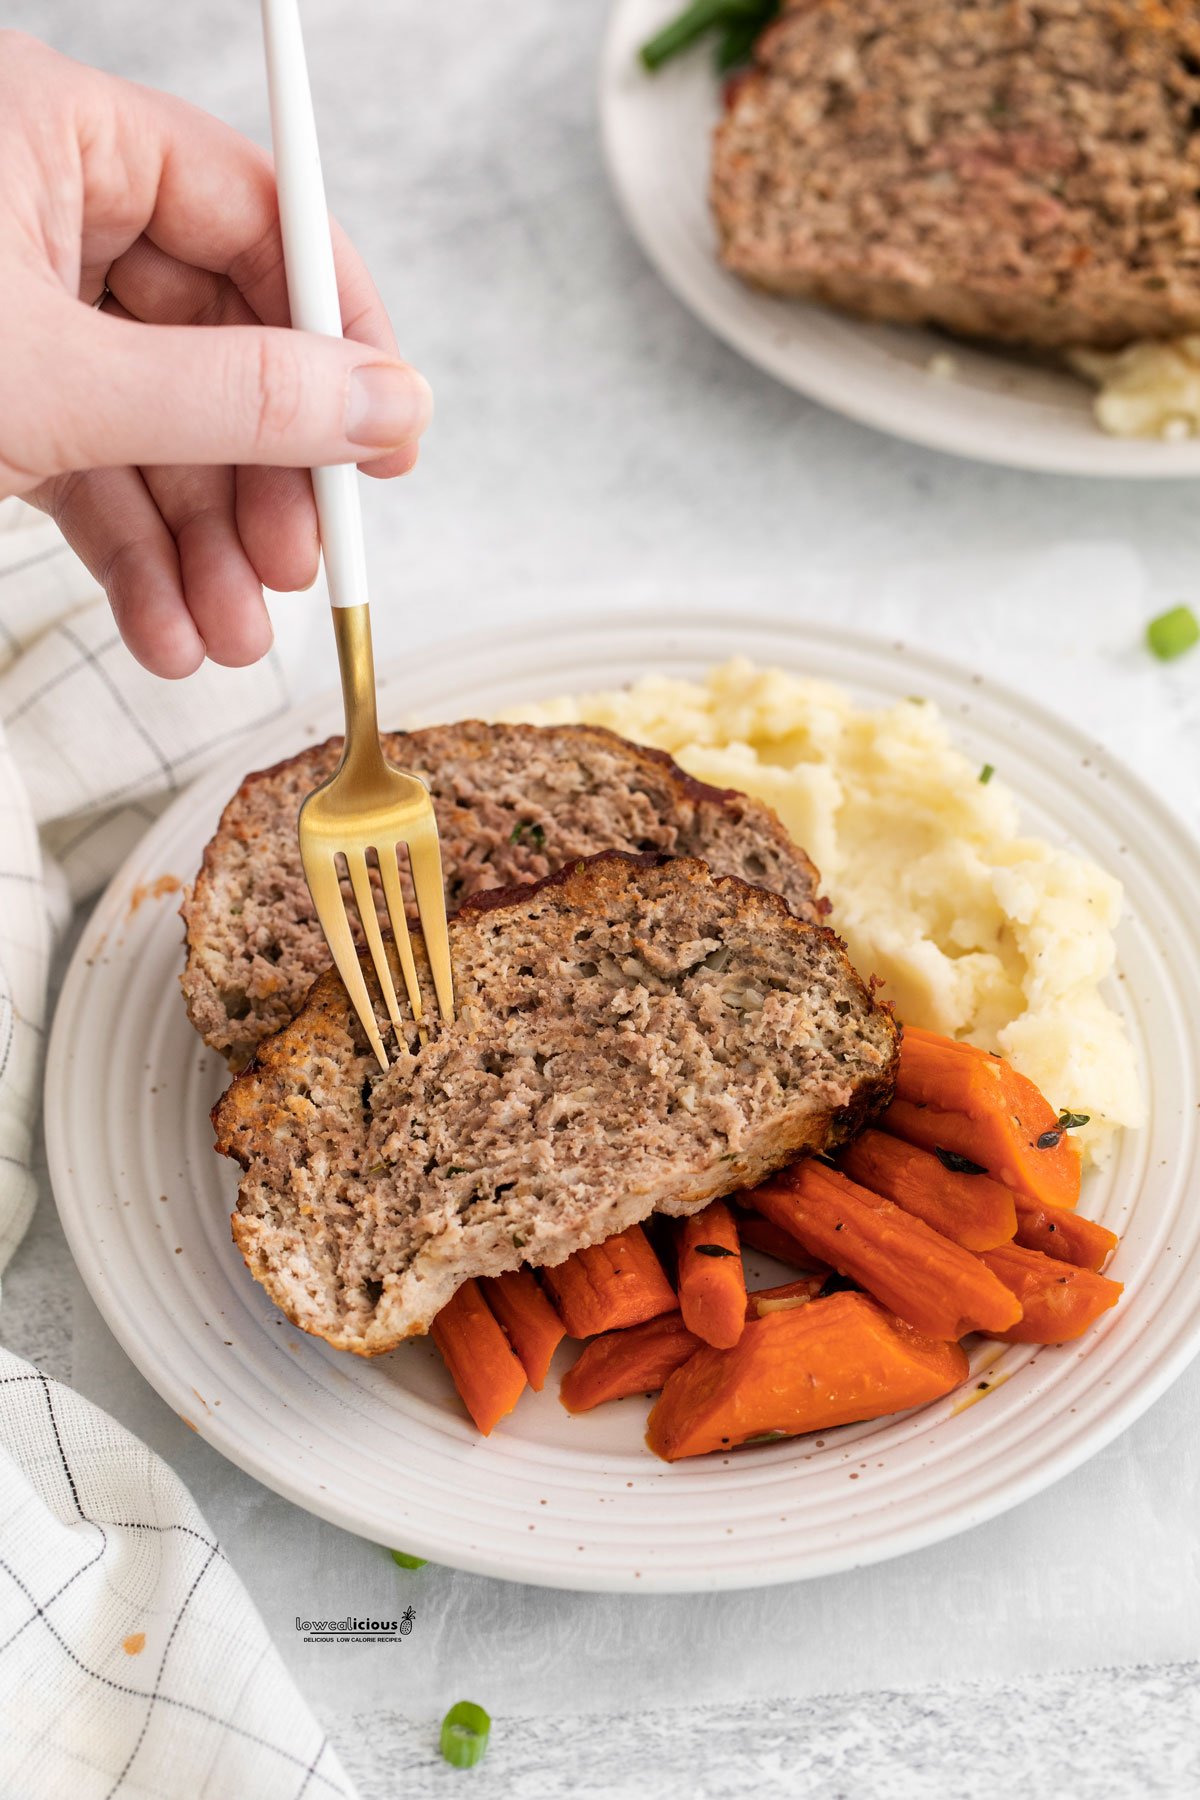 cooked Air Fryer Meatloaf on a white plate with mashed potatoes and carrots. A hand is holding a white and gold fork against a slice of meatloaf.